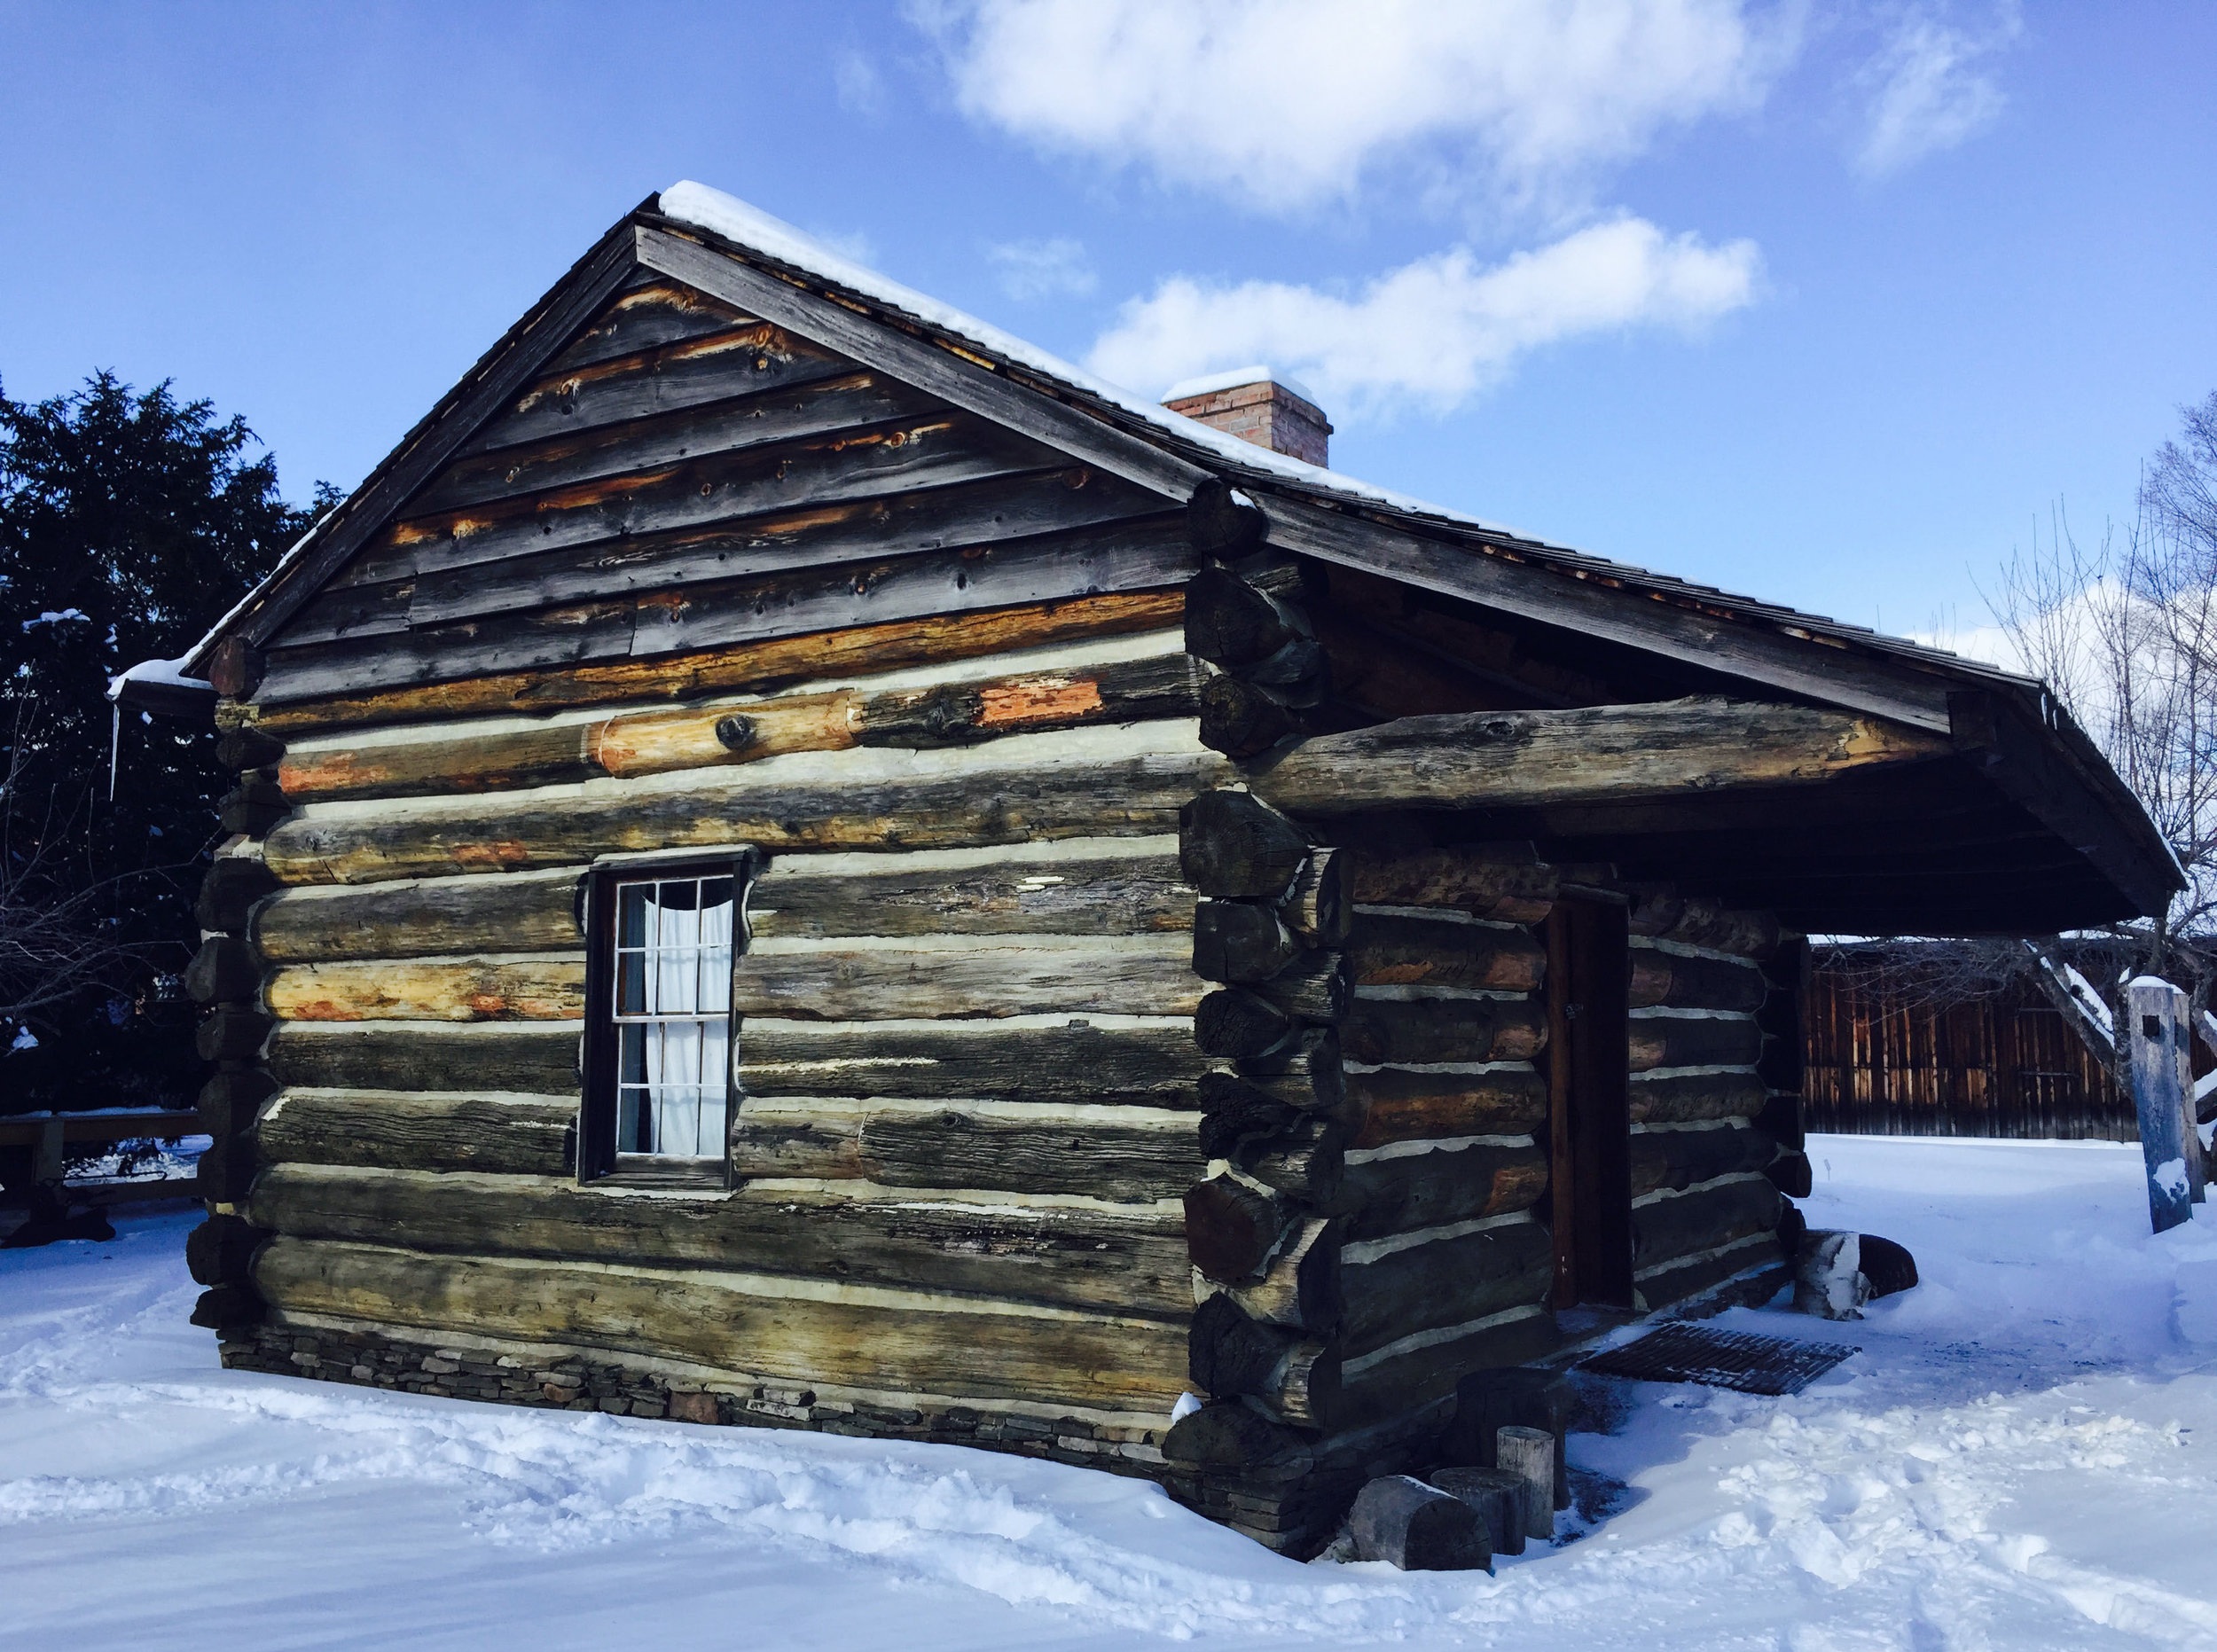 Corning/Painted-Post Historical Society, The Wixon Road Log Cabin